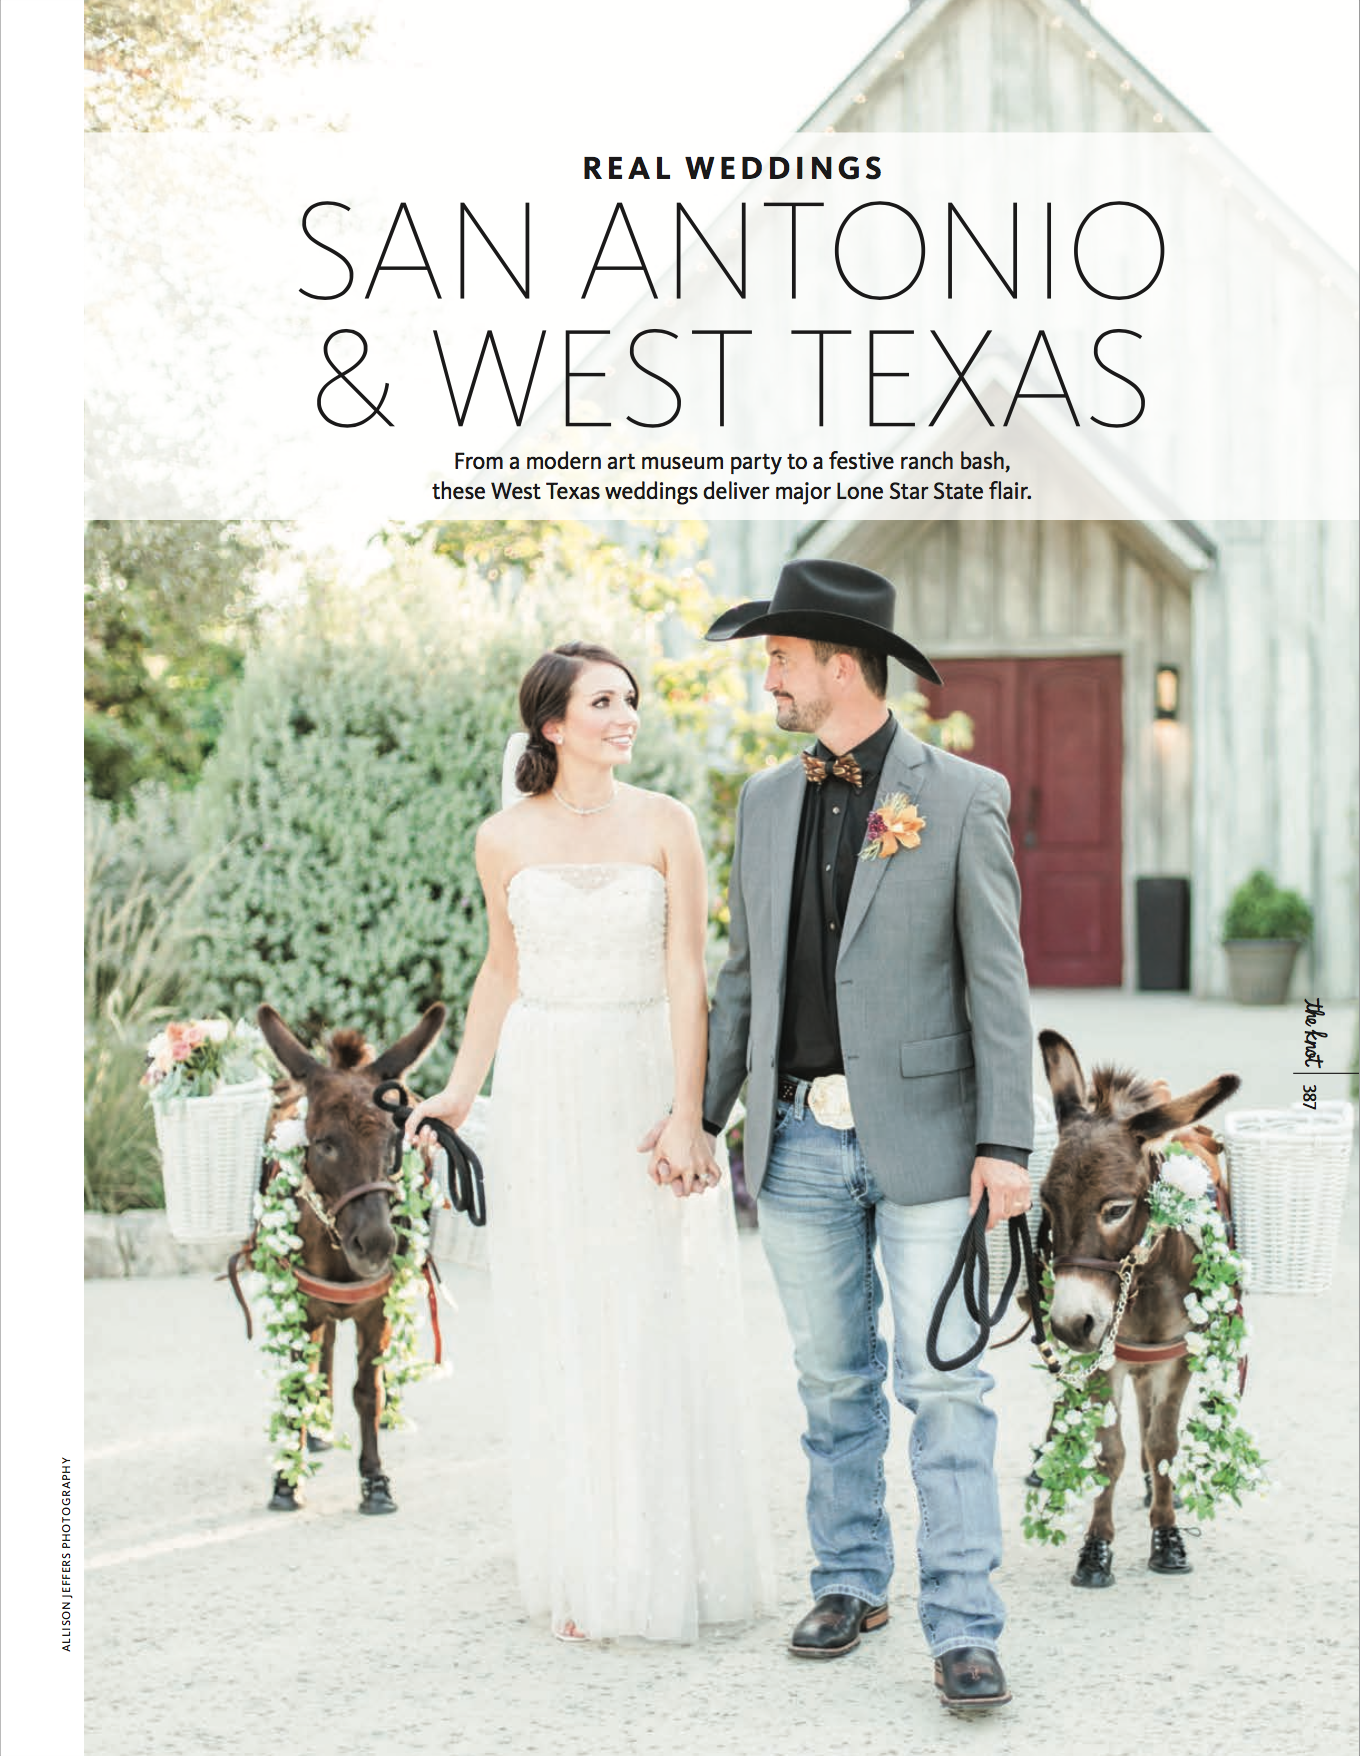 Paniolo Ranch Wedding with Donkeys Featured in The Knot Texas 2018 by Allison Jeffers Wedding Photography